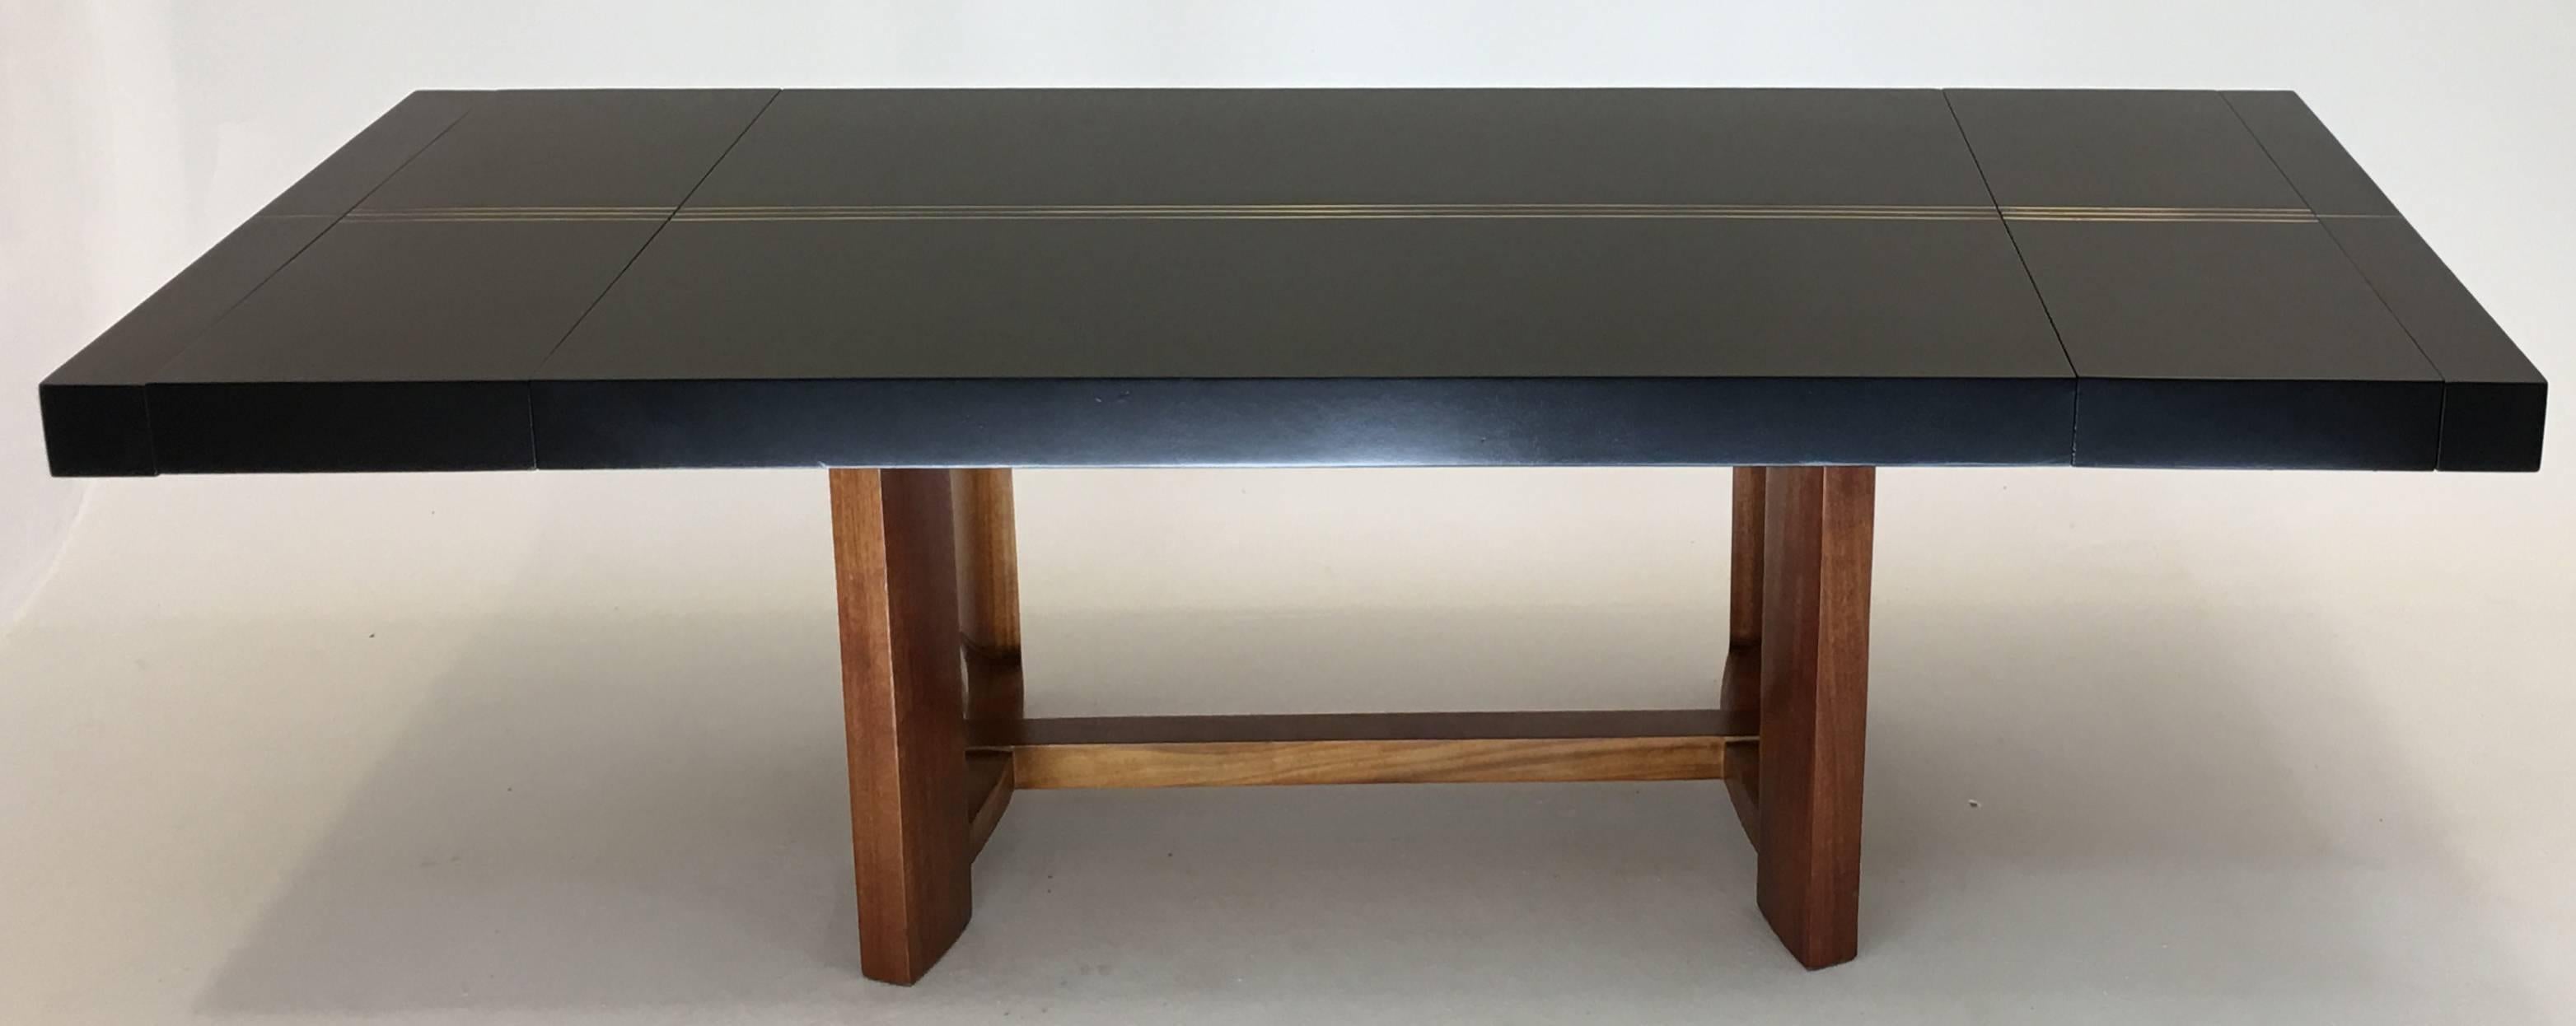 This bold and impressive vintage dining table was produced by T.H. Robsjohn-Gibbings for Widdicomb in 1951. The table is known as a 